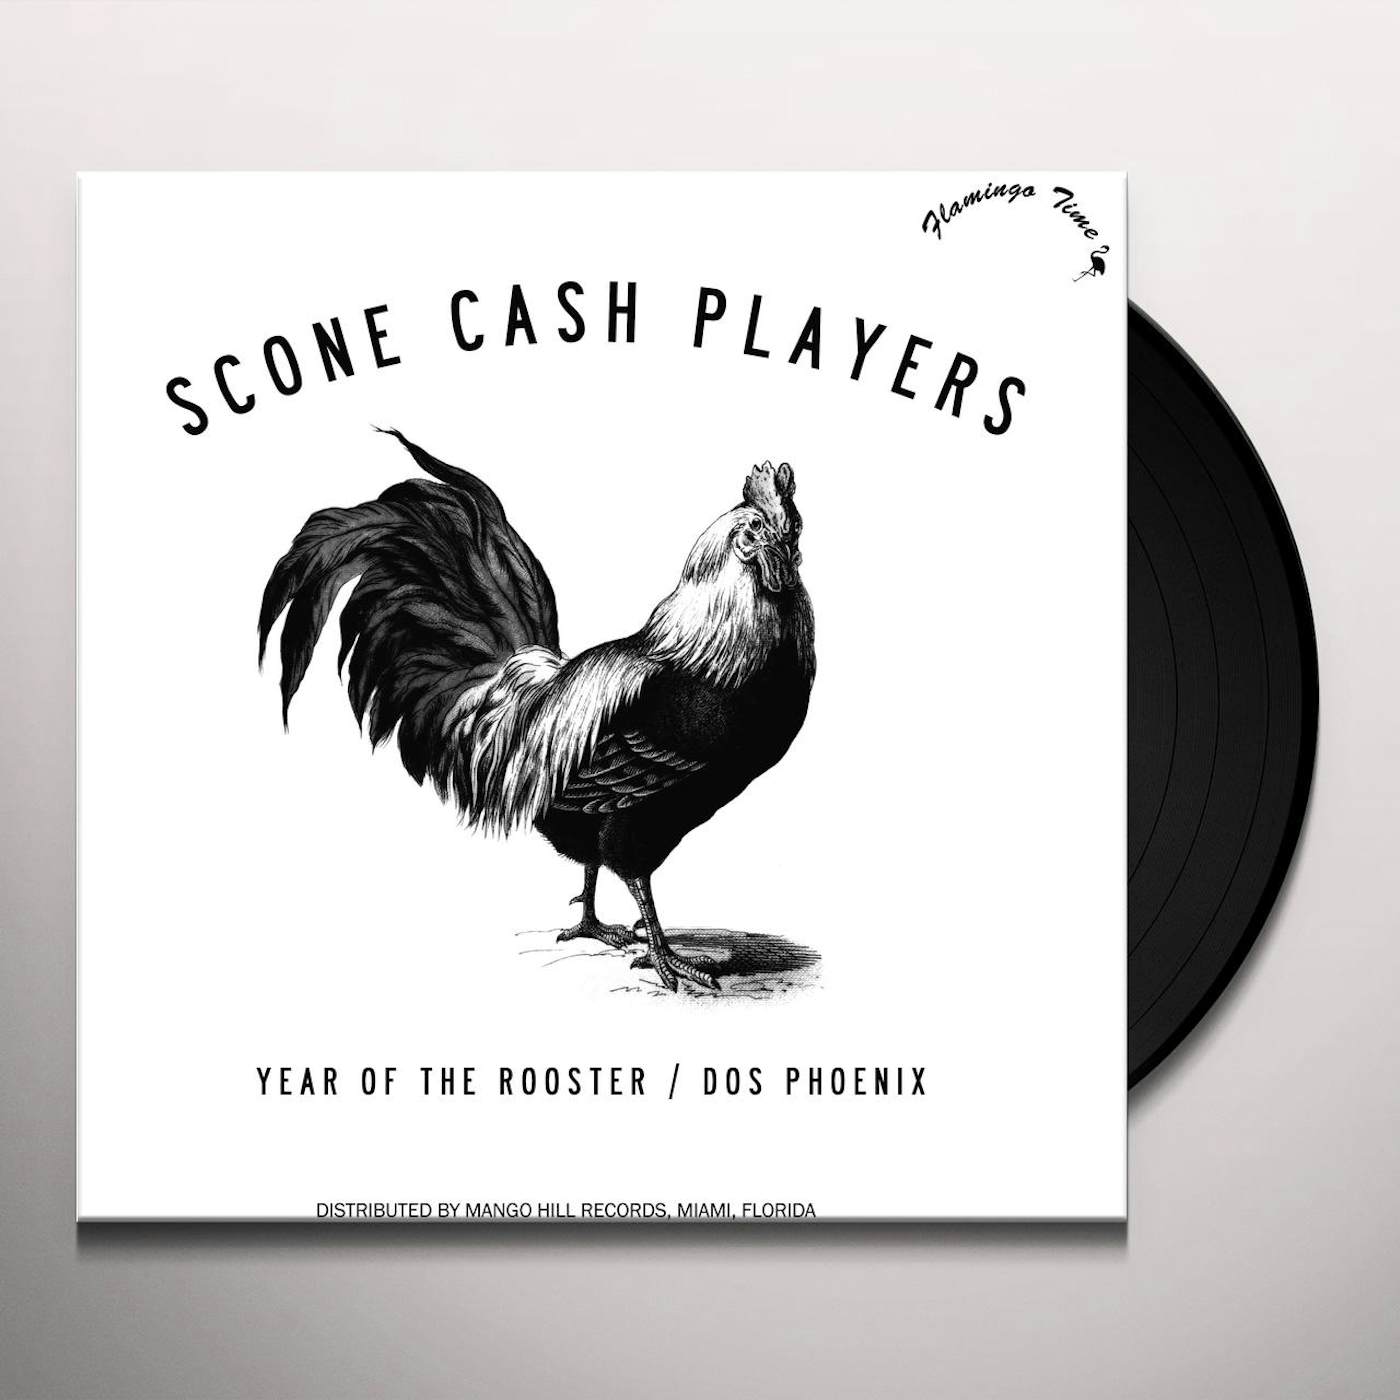 Scone Cash Players Year of the Rooster / Dos Phoenix Vinyl Record